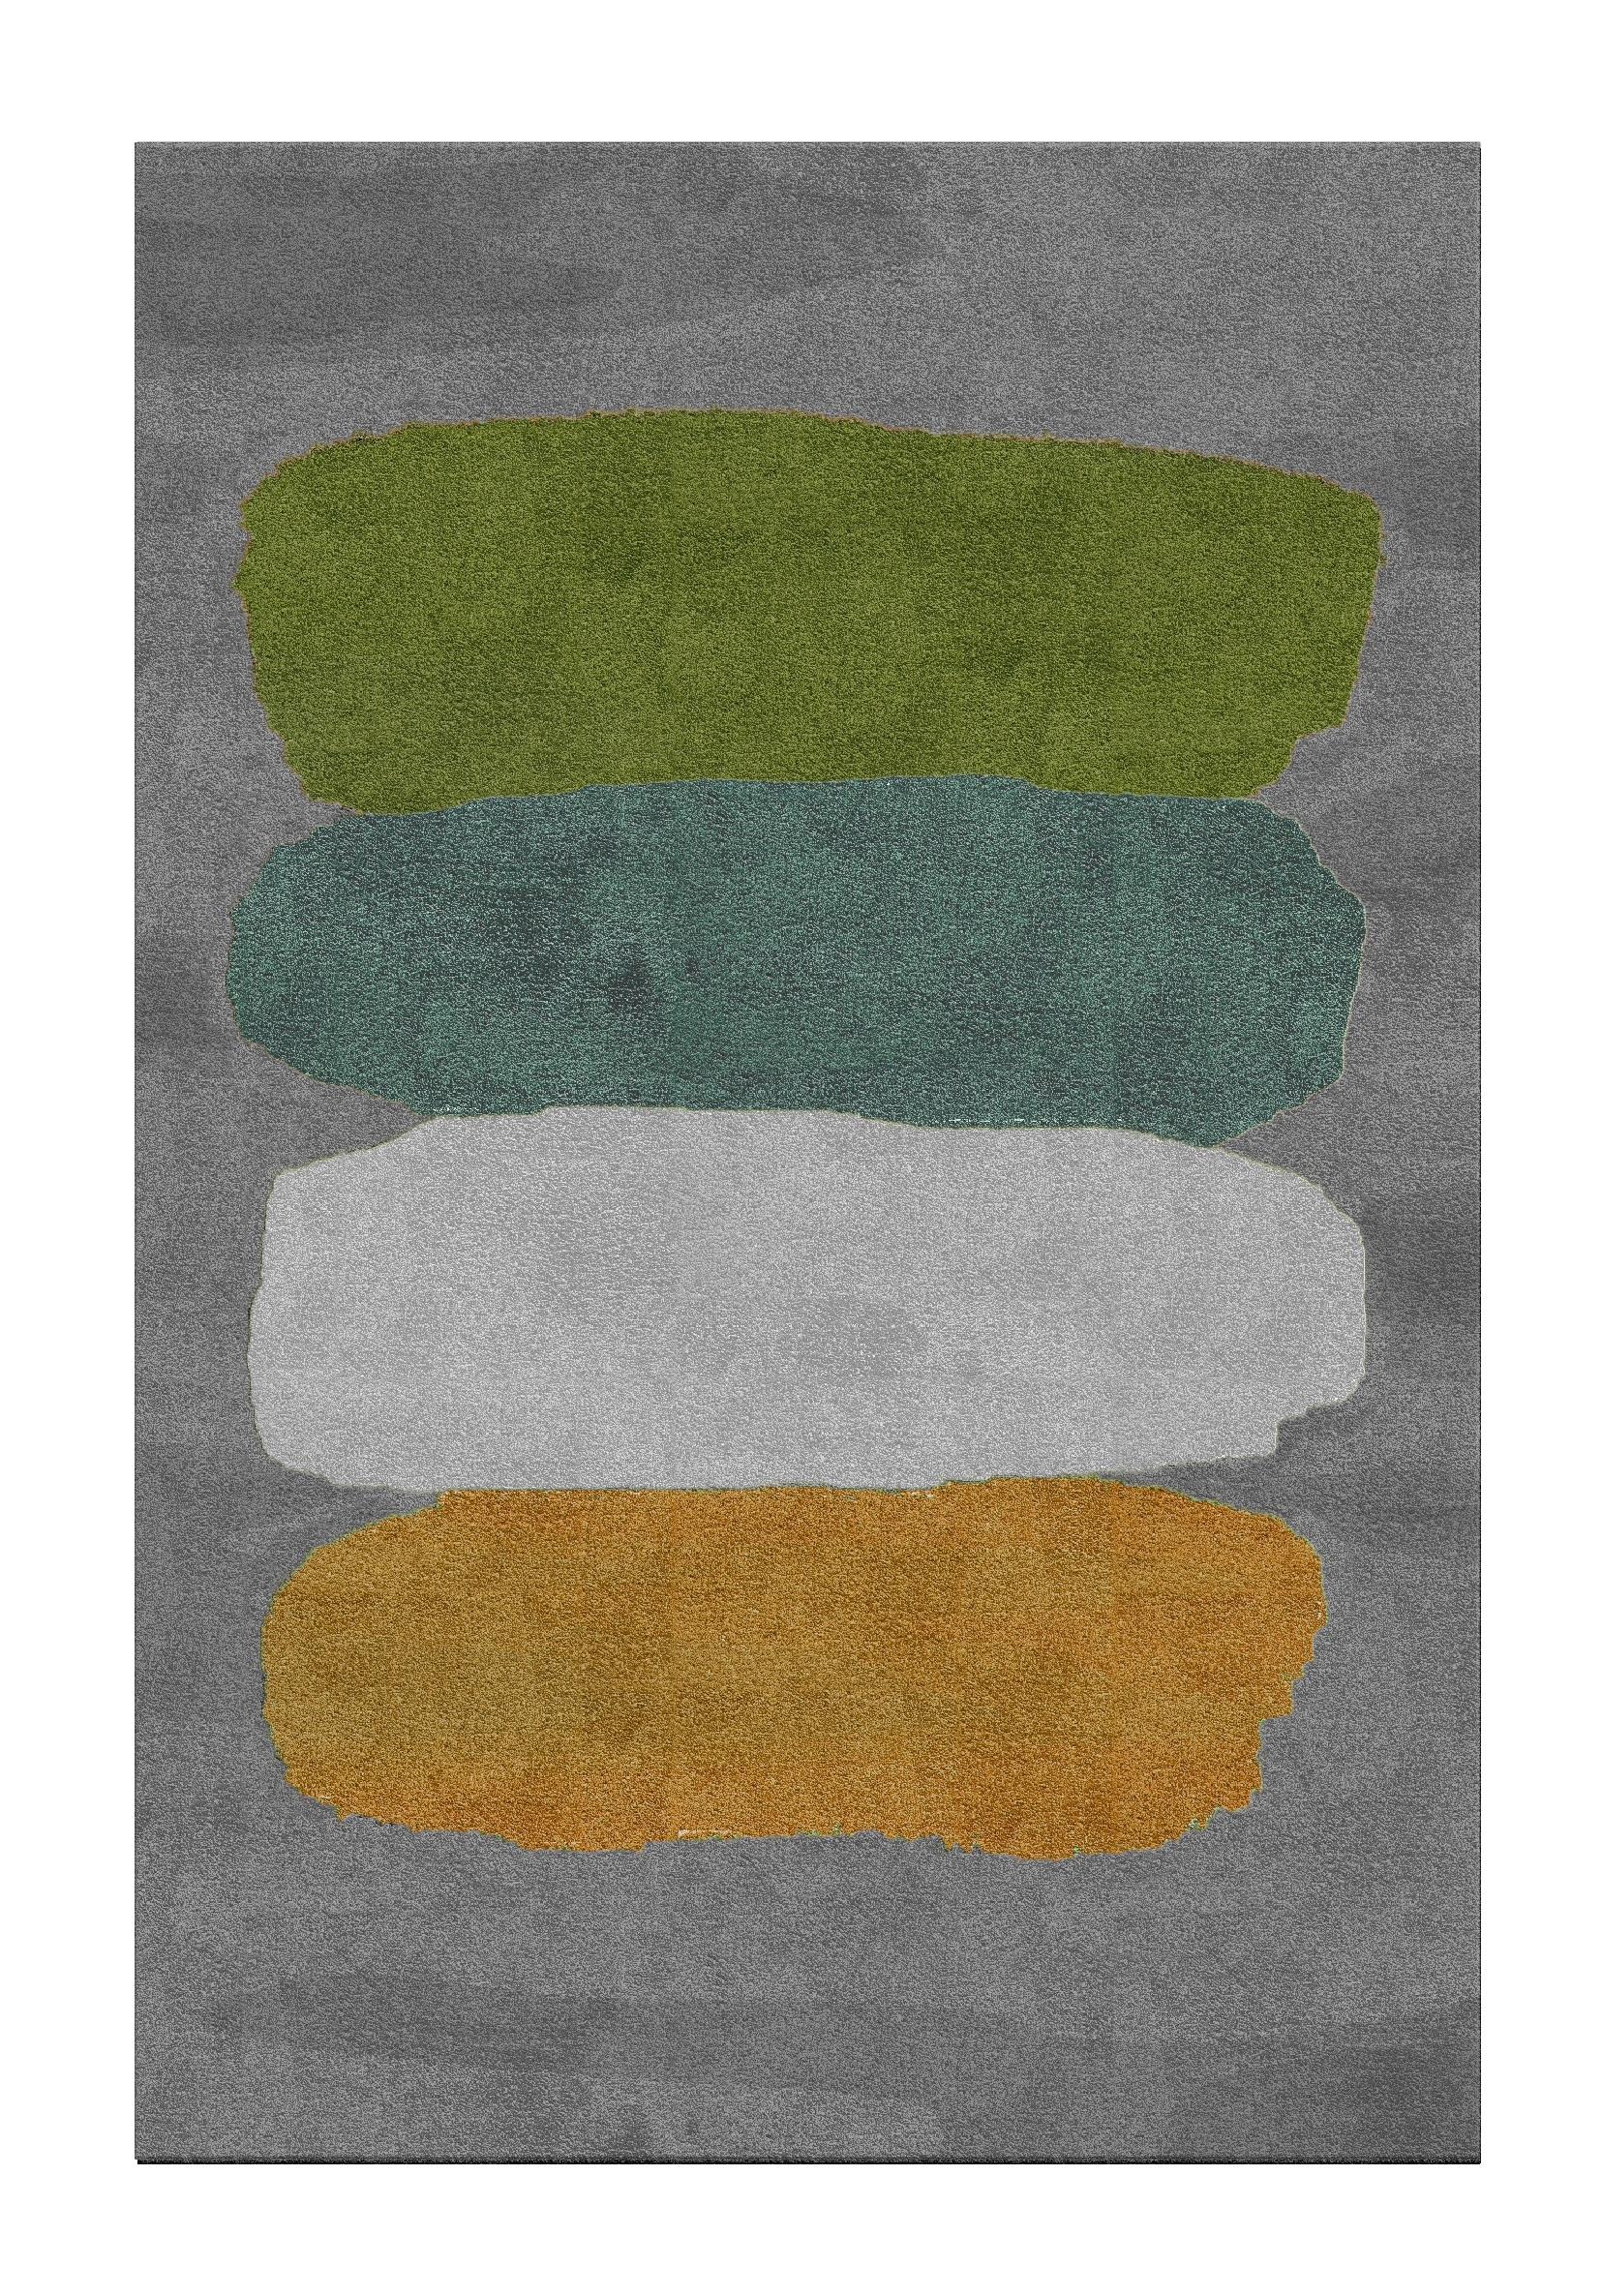 Palette rug I by Sarah Balivo
Dimensions: D 300 x W 200 cm
Materials: viscose, linen
Available in other colors.

The Palette collection drives its inspiration from the interior design world.
Each rug becomes a canvas redefining the interior